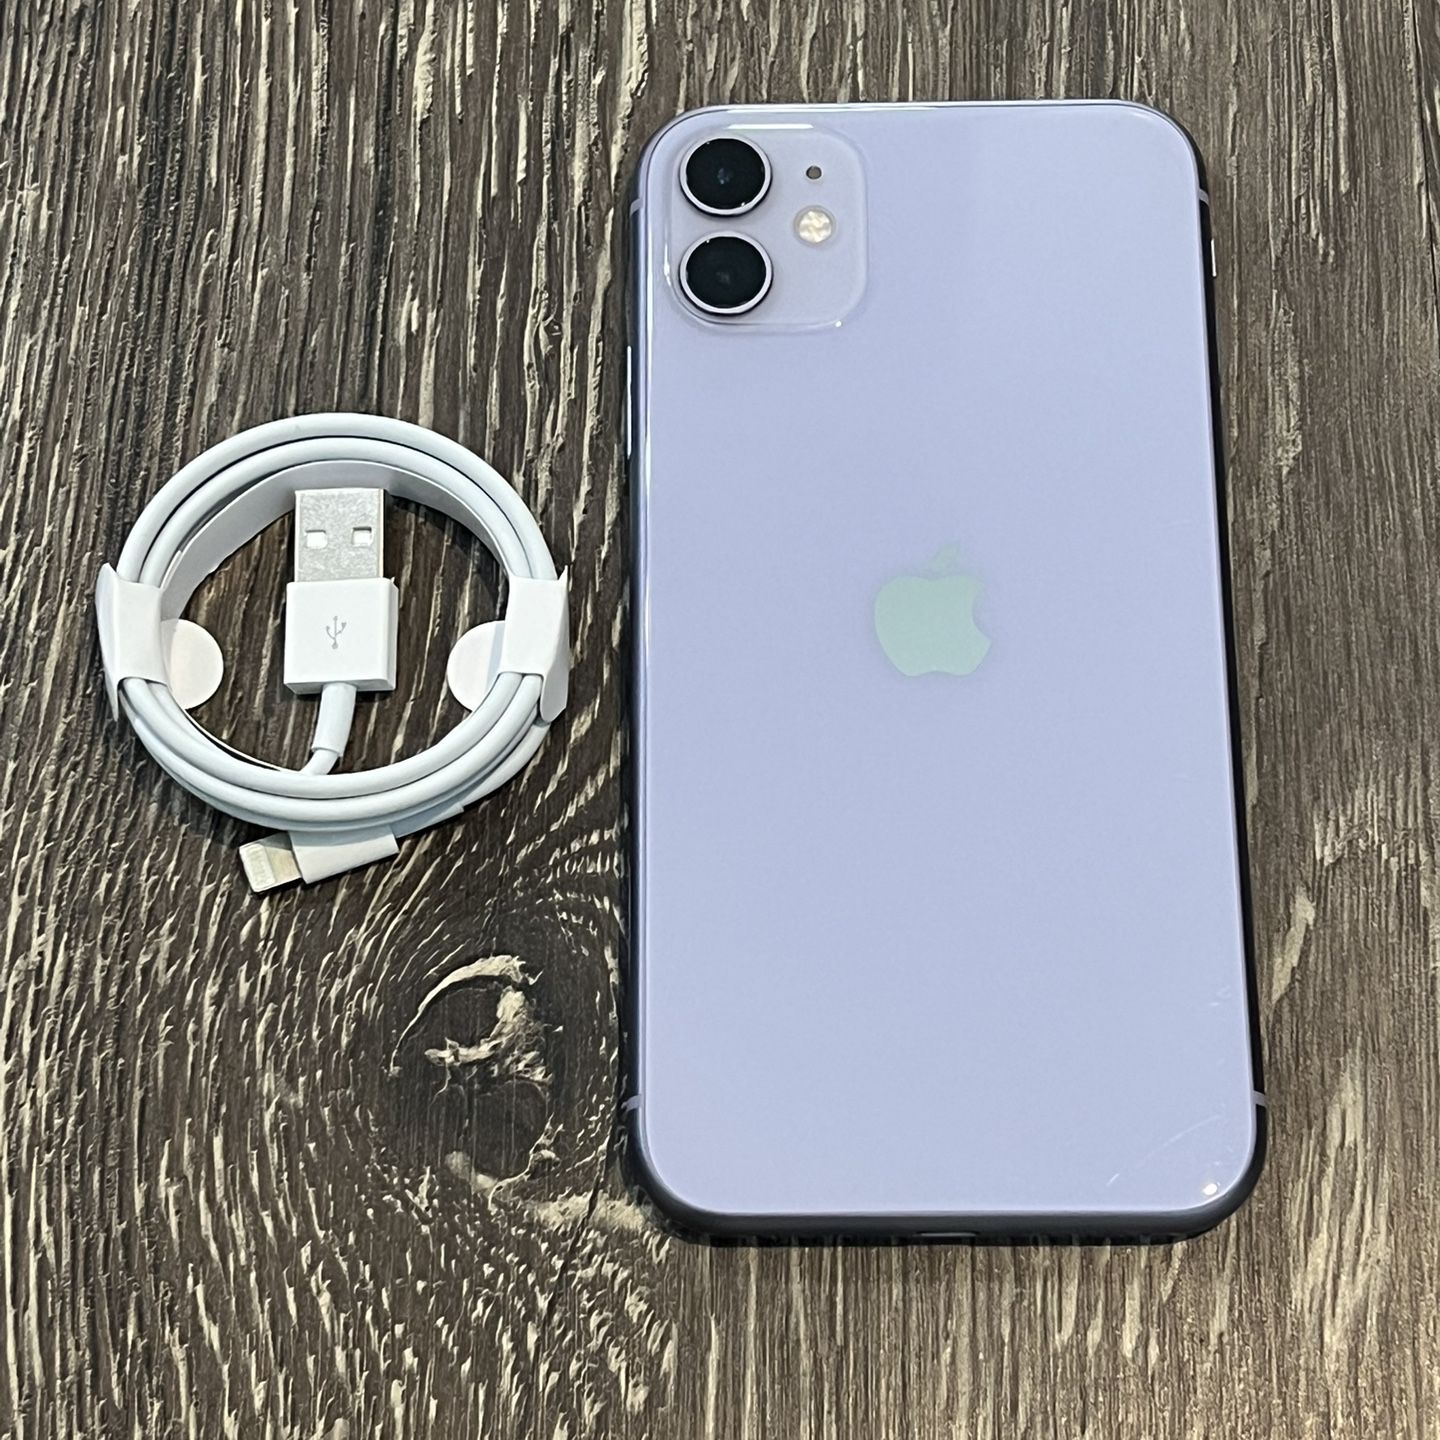 iPhone 11 Purple UNLOCKED FOR ALL CARRIERS!